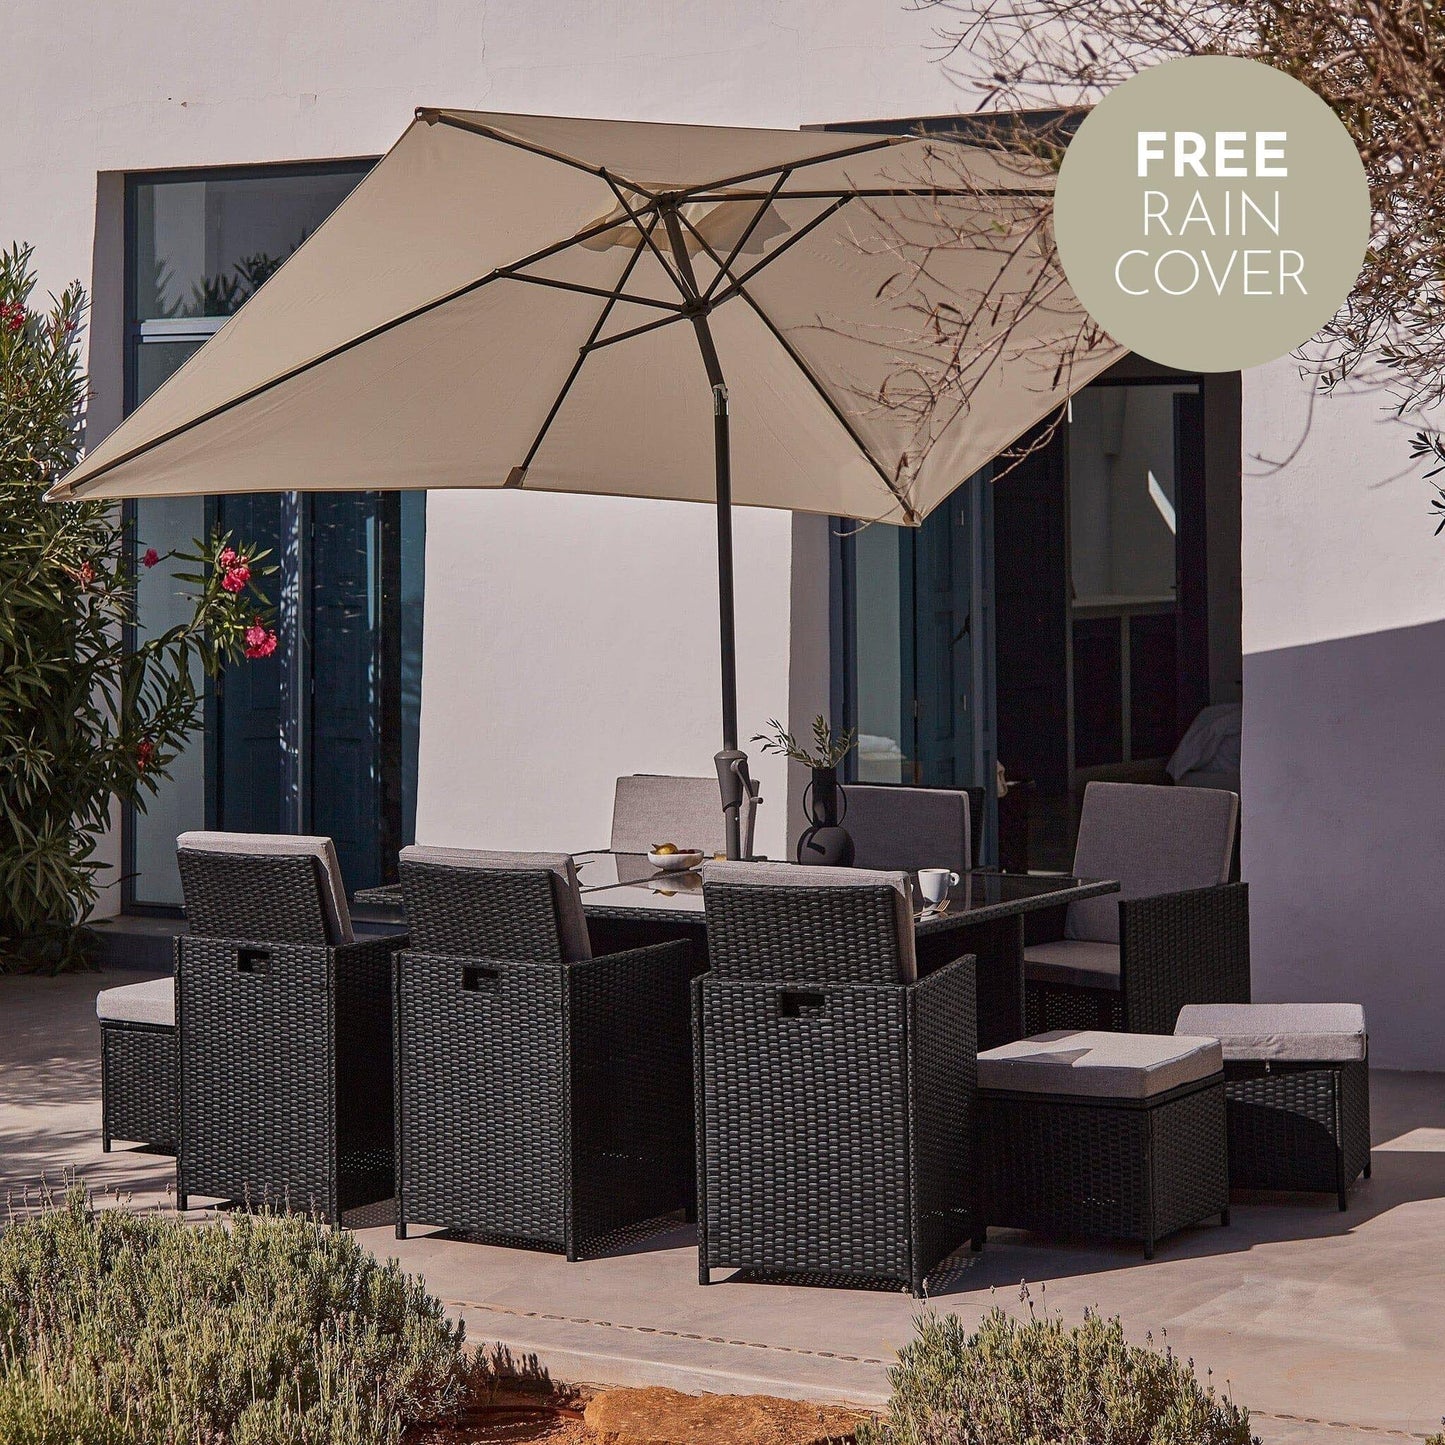 10 Seater Rattan Cube Outdoor Dining Set with Parasol - Black Weave